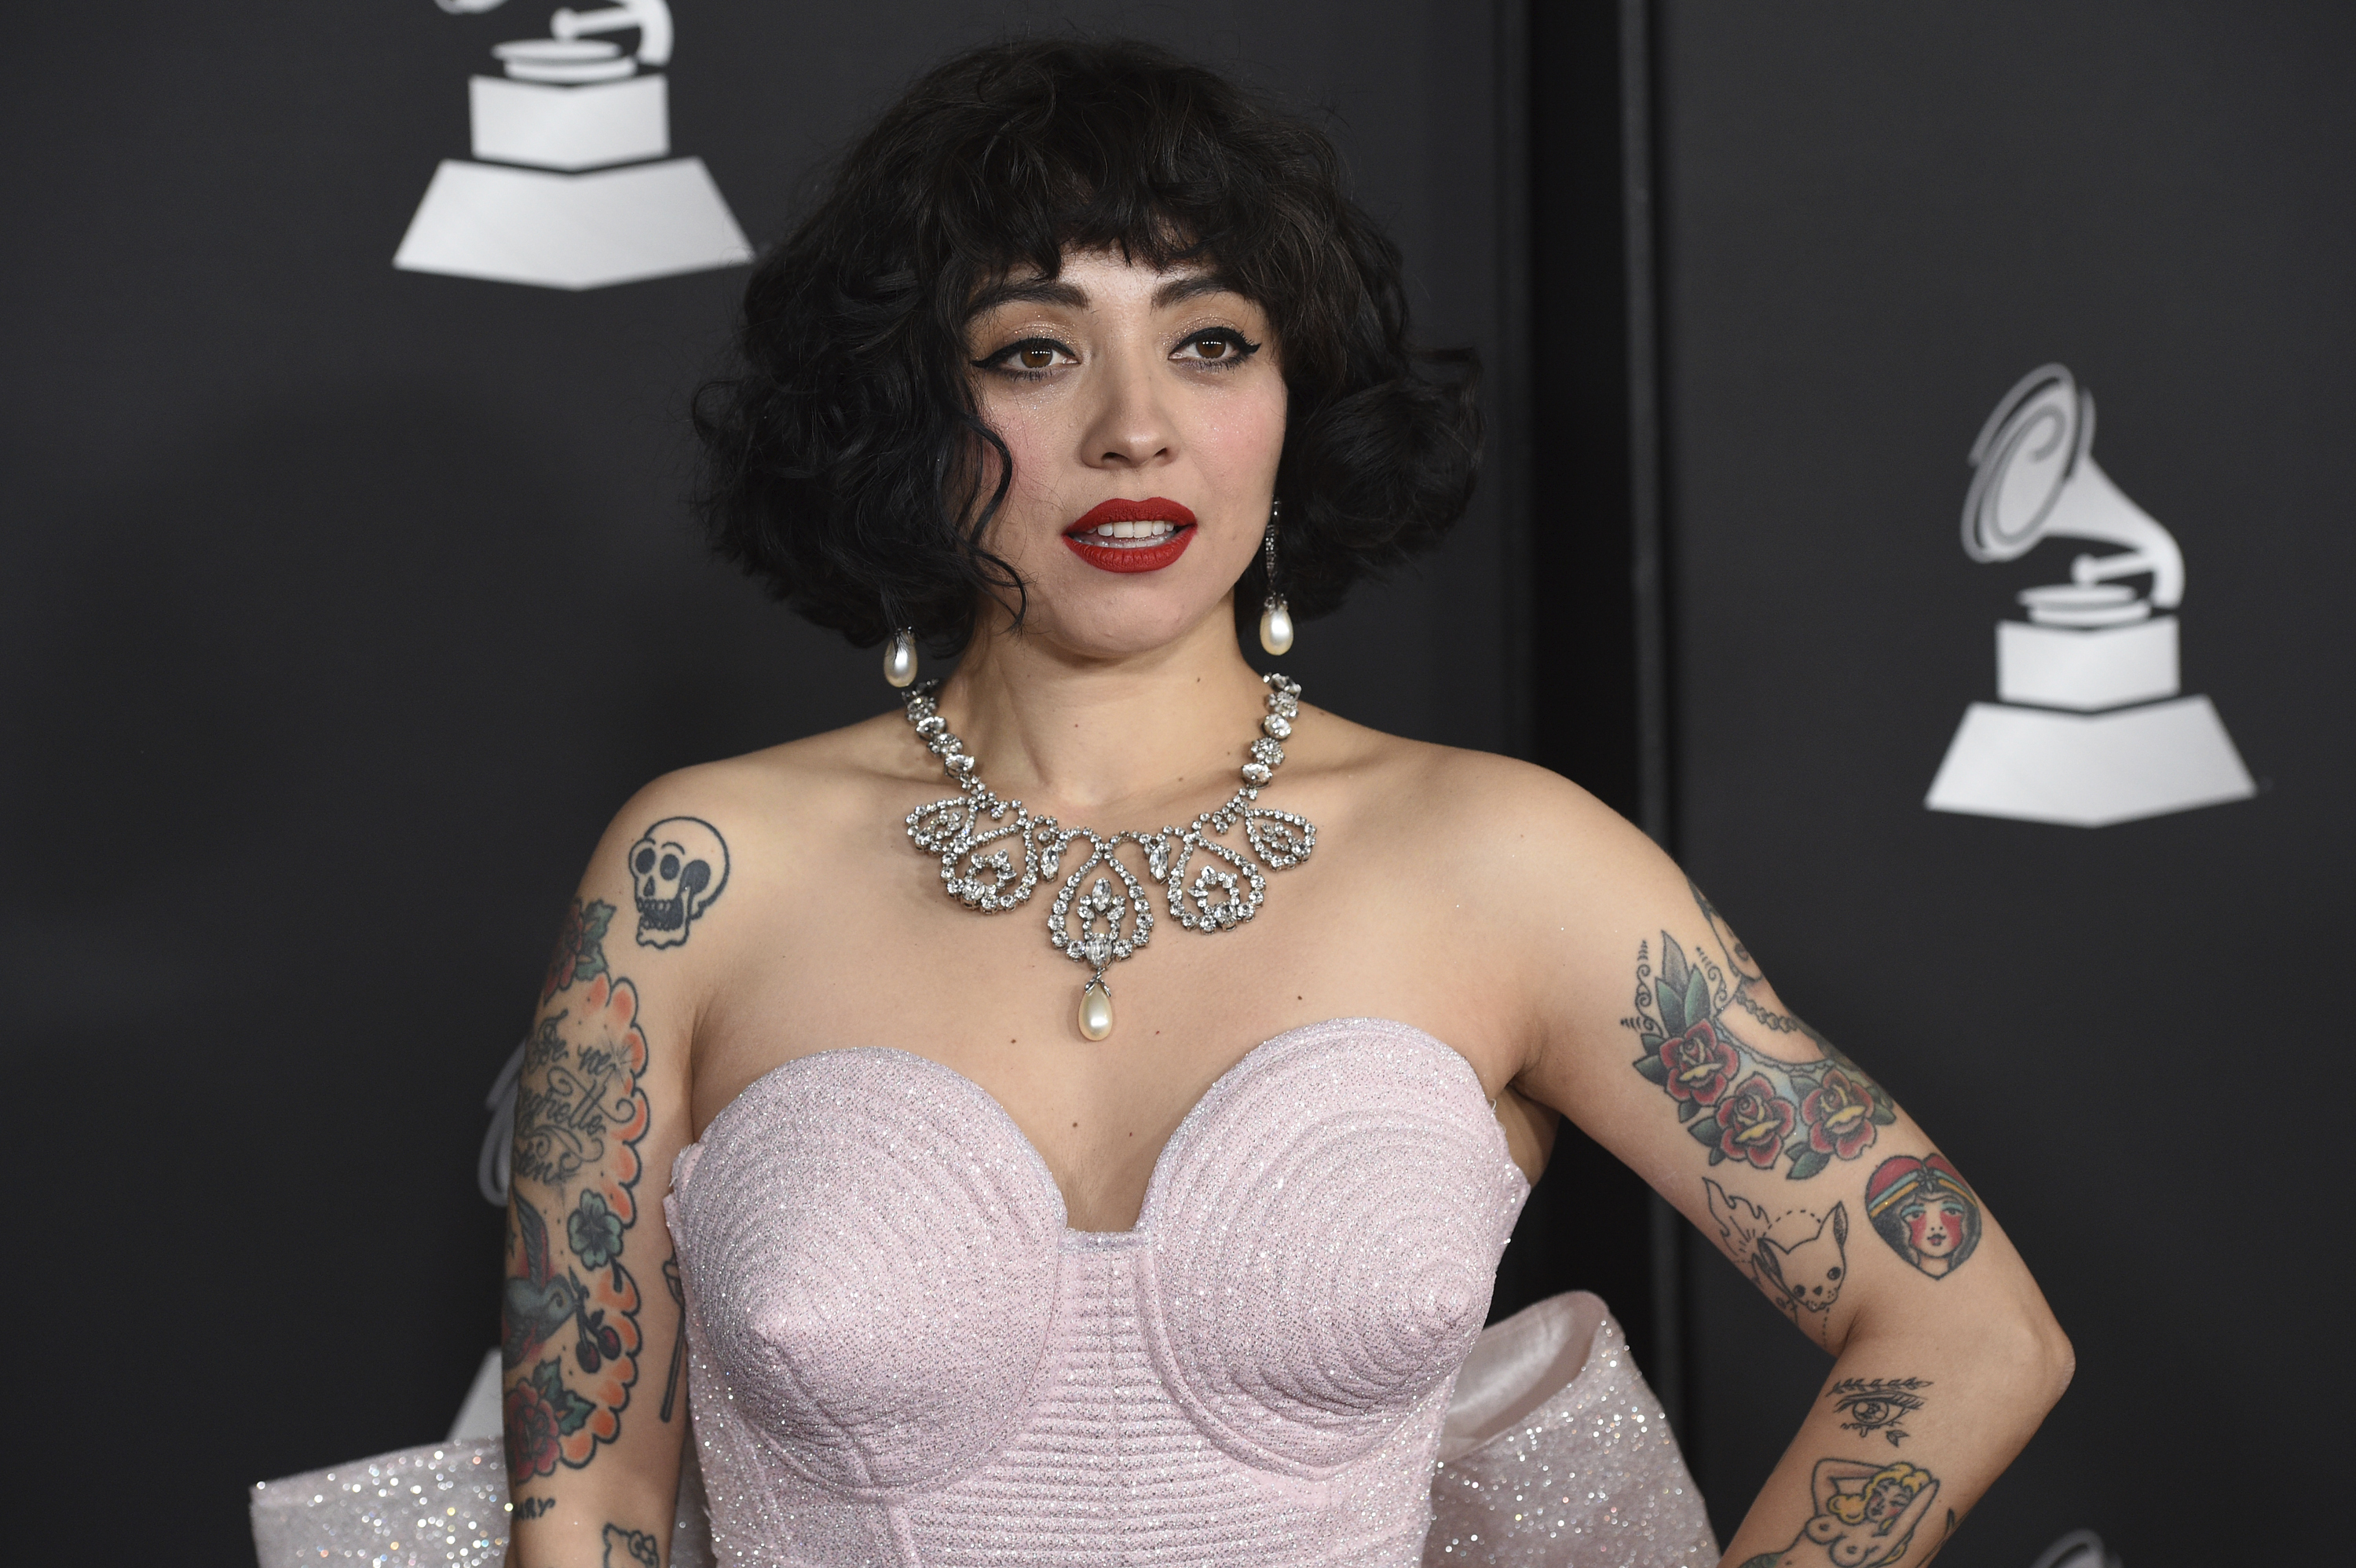 FILE - Mon Laferte arrives at the Latin Recording Academy Person of the Year ceremony for Juanes at the MGM Conference Center on Nov. 13, 2019 in Las Vegas.  Mon Laferte will perform live at the Latin Grammys for which she is nominated for four awards on November 18, 2021. (Photo Chris Pizzello / Invision / AP, file)